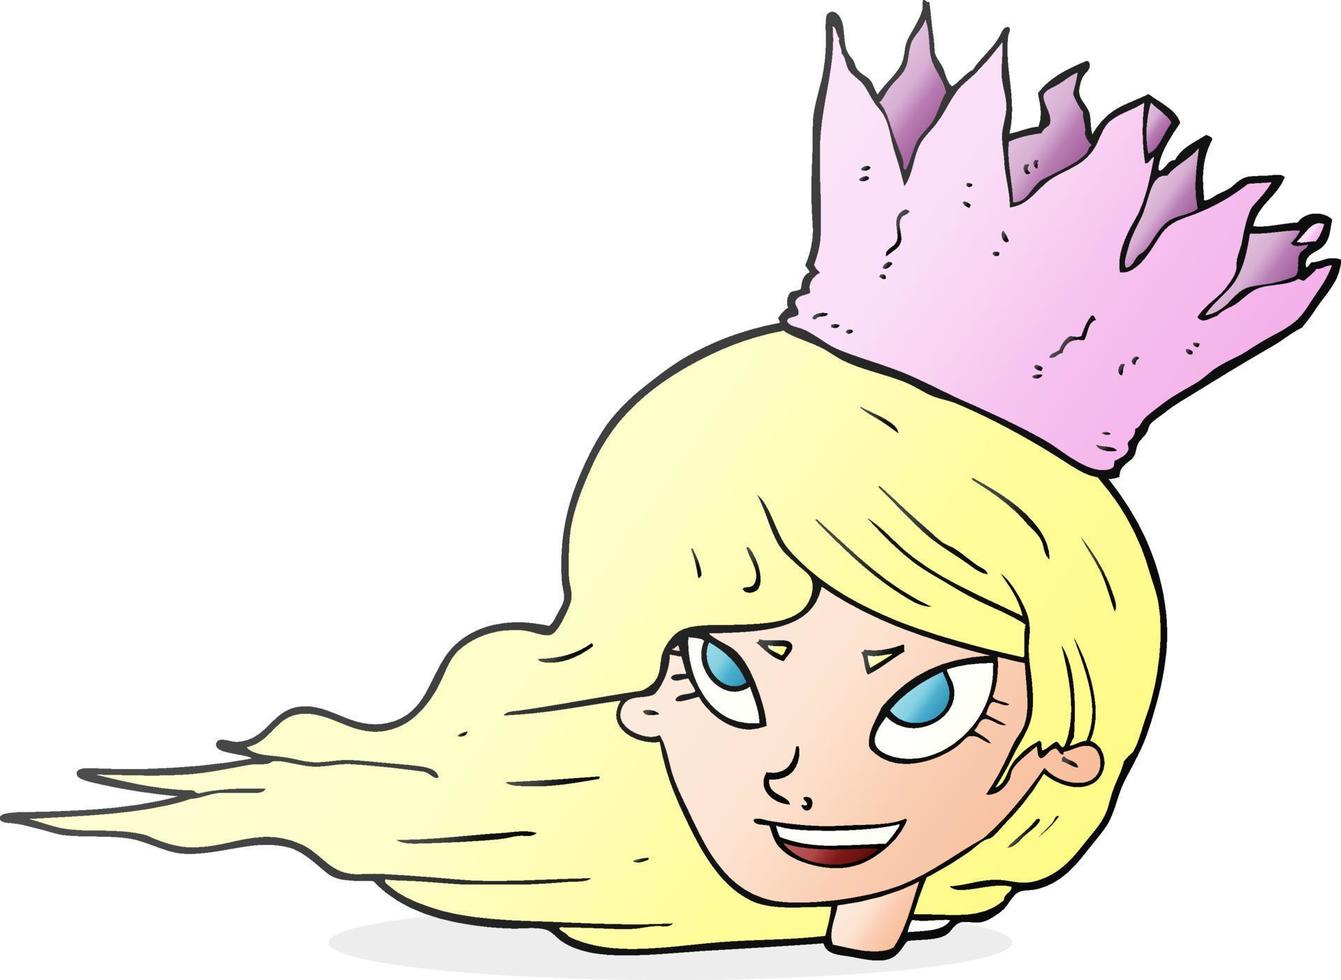 freehand drawn cartoon woman with blowing hair vector